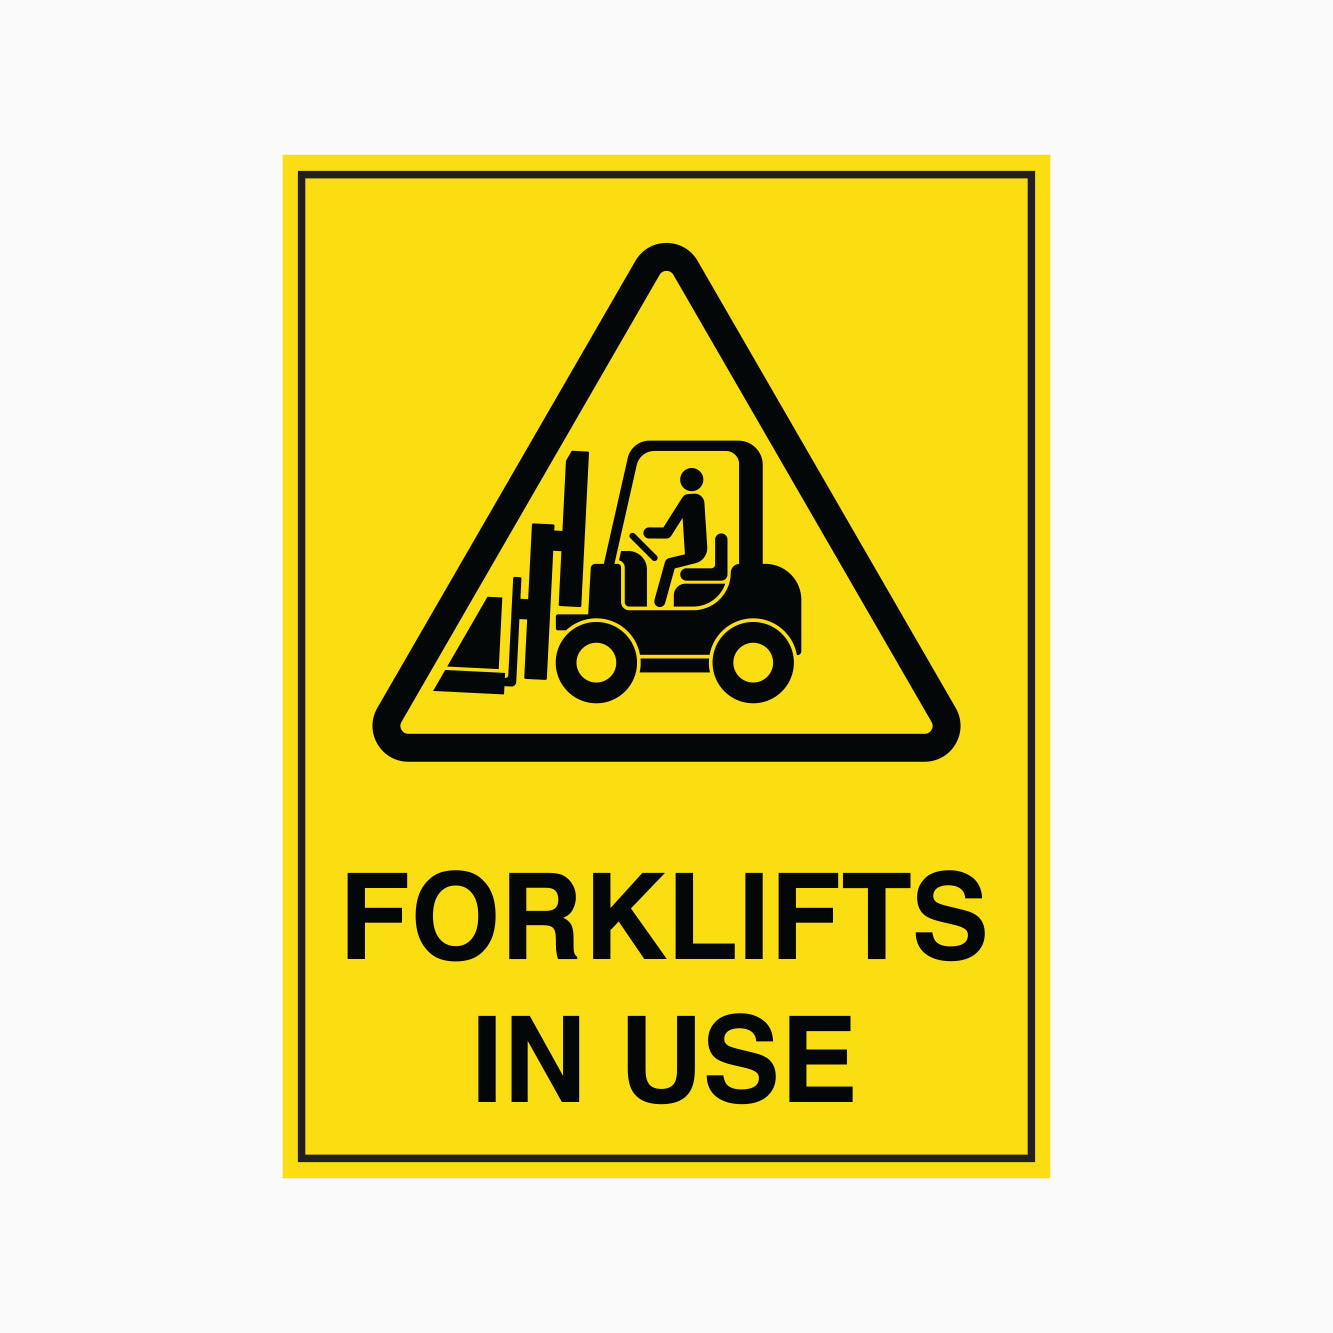 FORKLIFTS IN USE SIGN - GET SIGNS